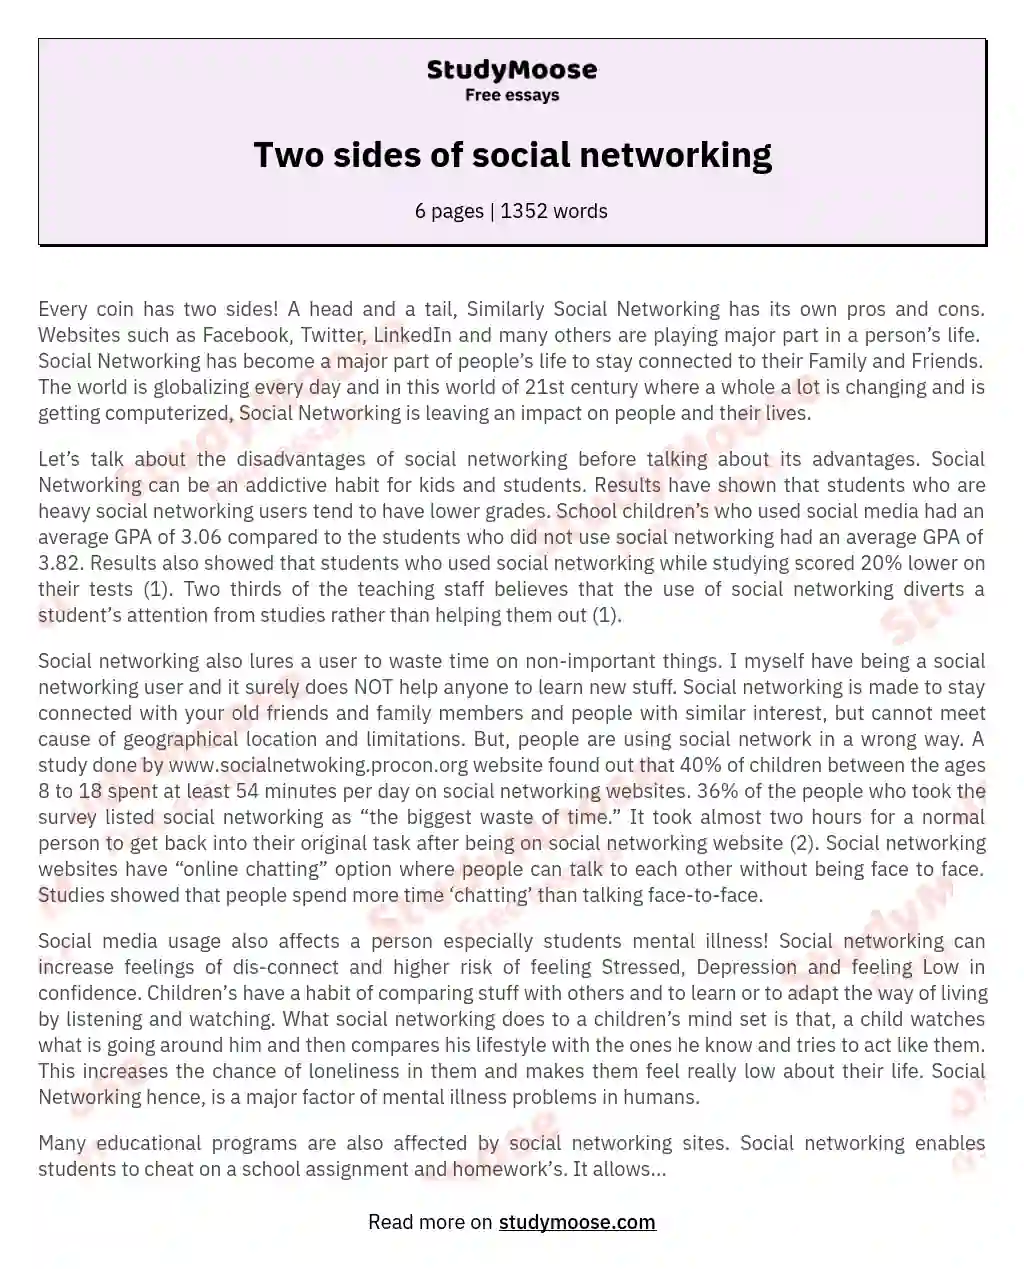 Two sides of social networking essay